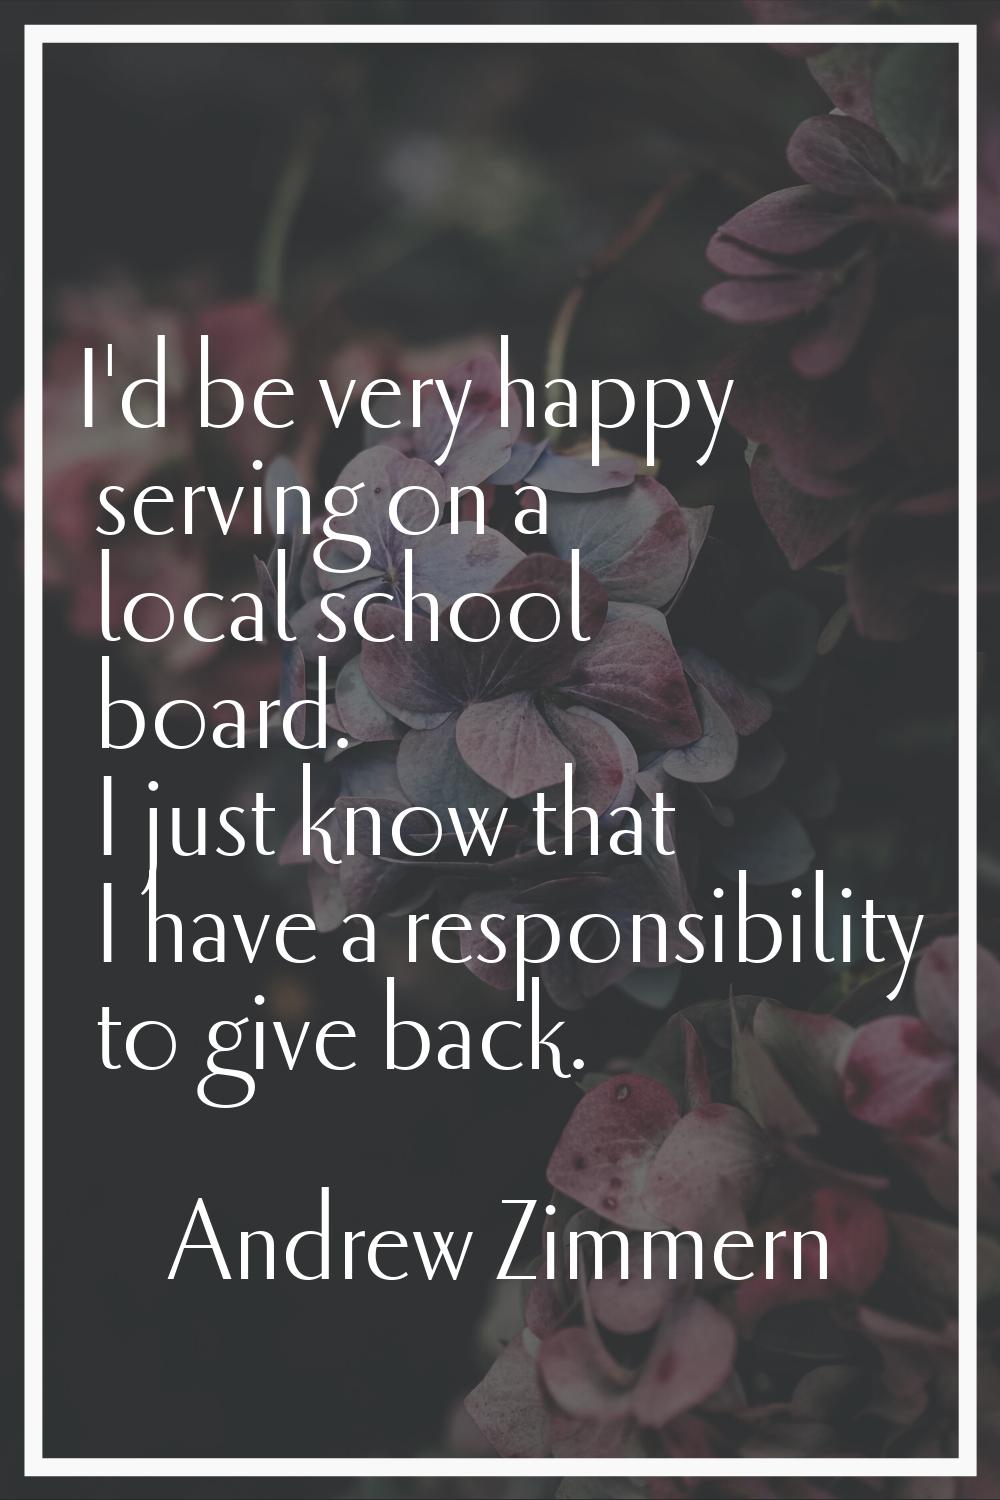 I'd be very happy serving on a local school board. I just know that I have a responsibility to give